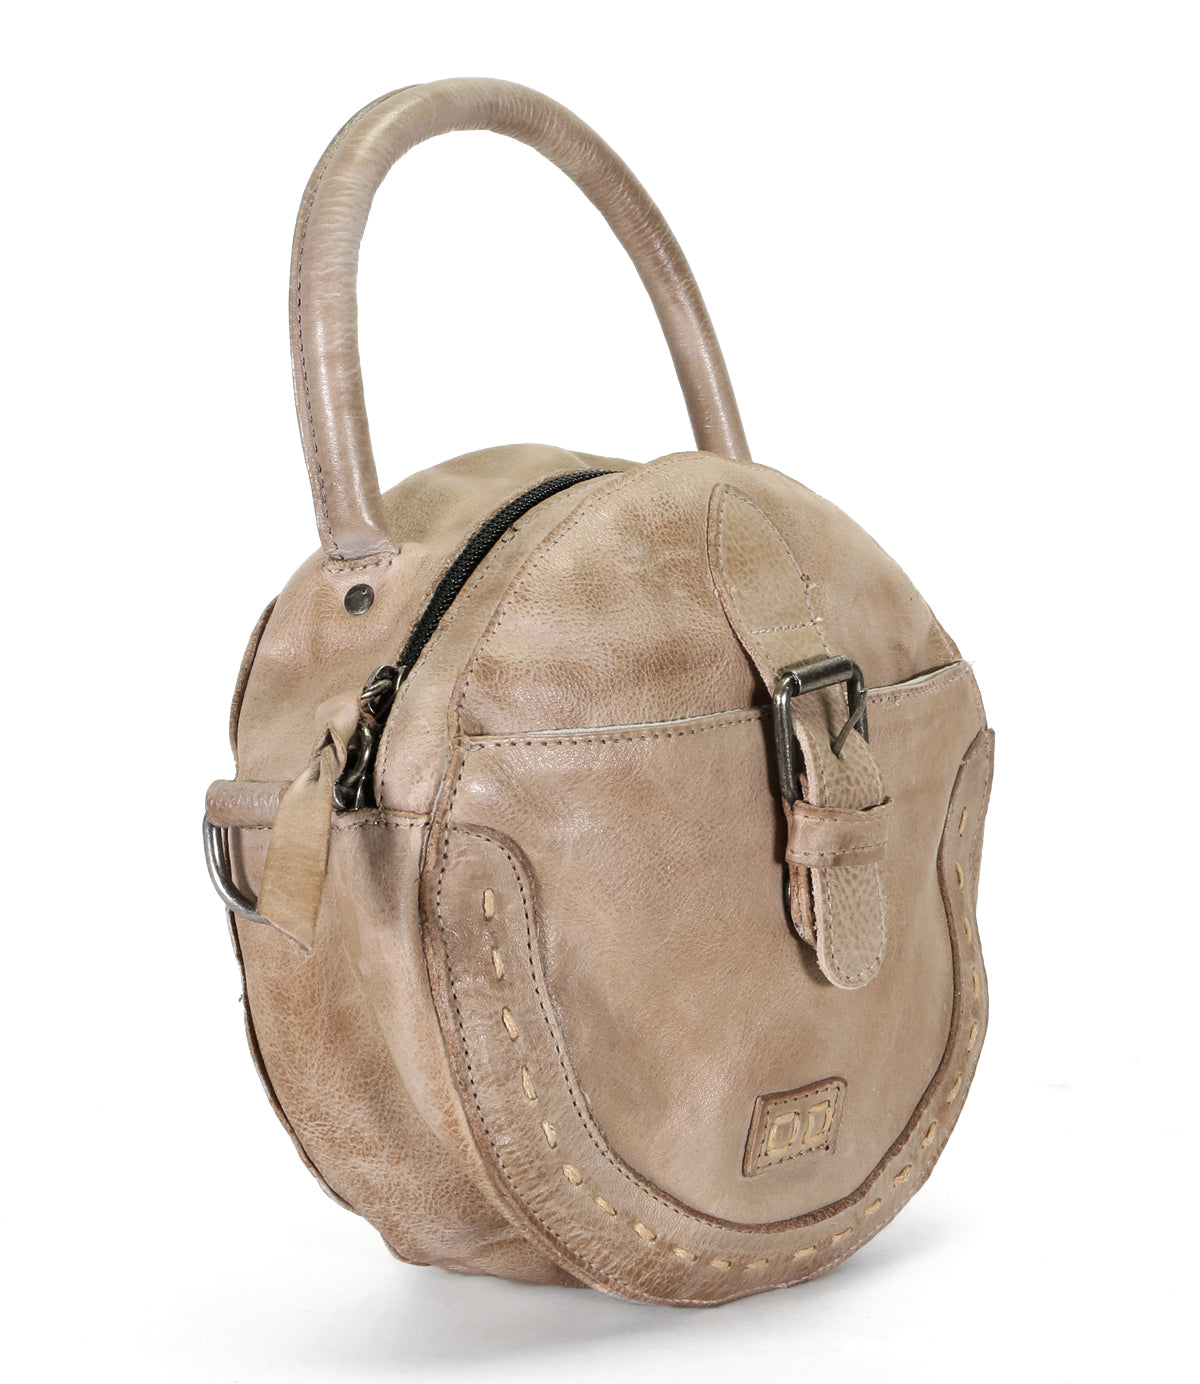 A beige leather Bed Stu Arenfield handbag with a strap and buckle.